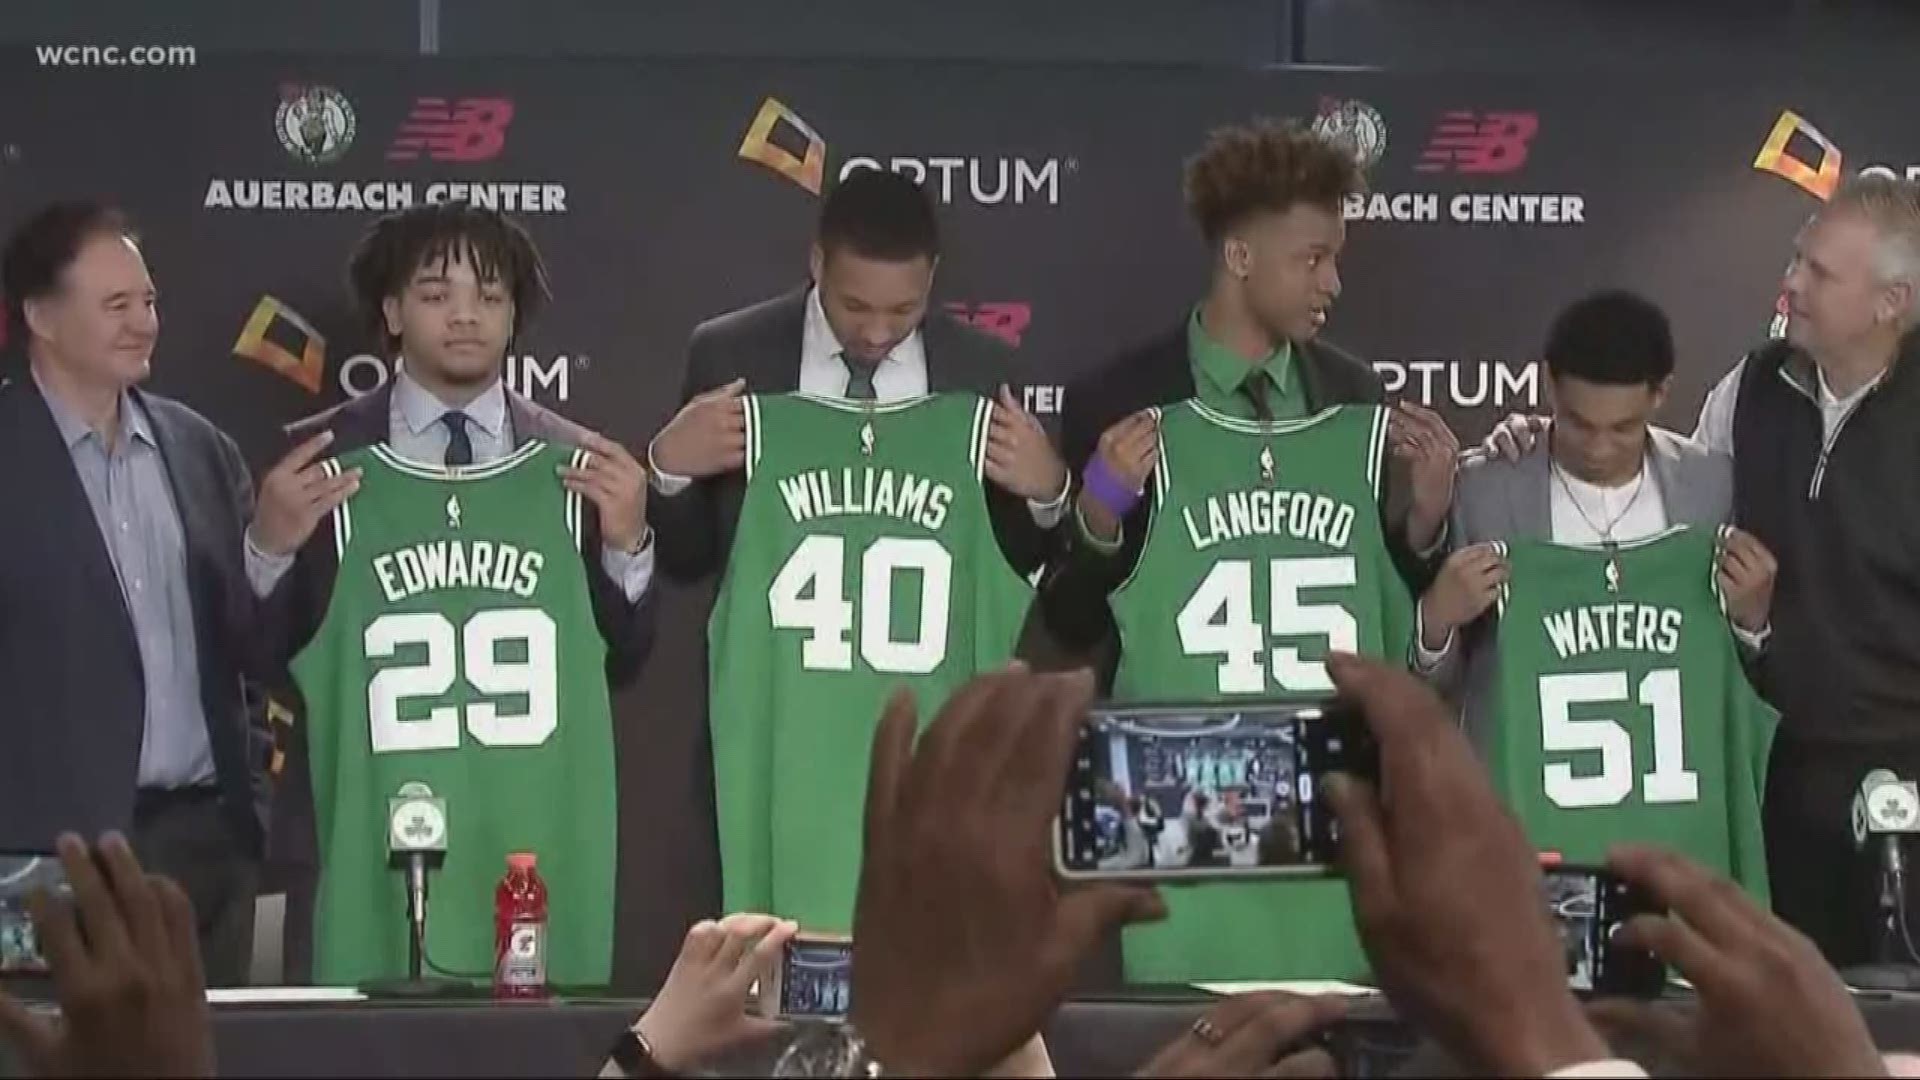 Charlotte's own Grant Williams introduced as the first round pick by one of the best franchise's in NBA history, the Boston Celtics.